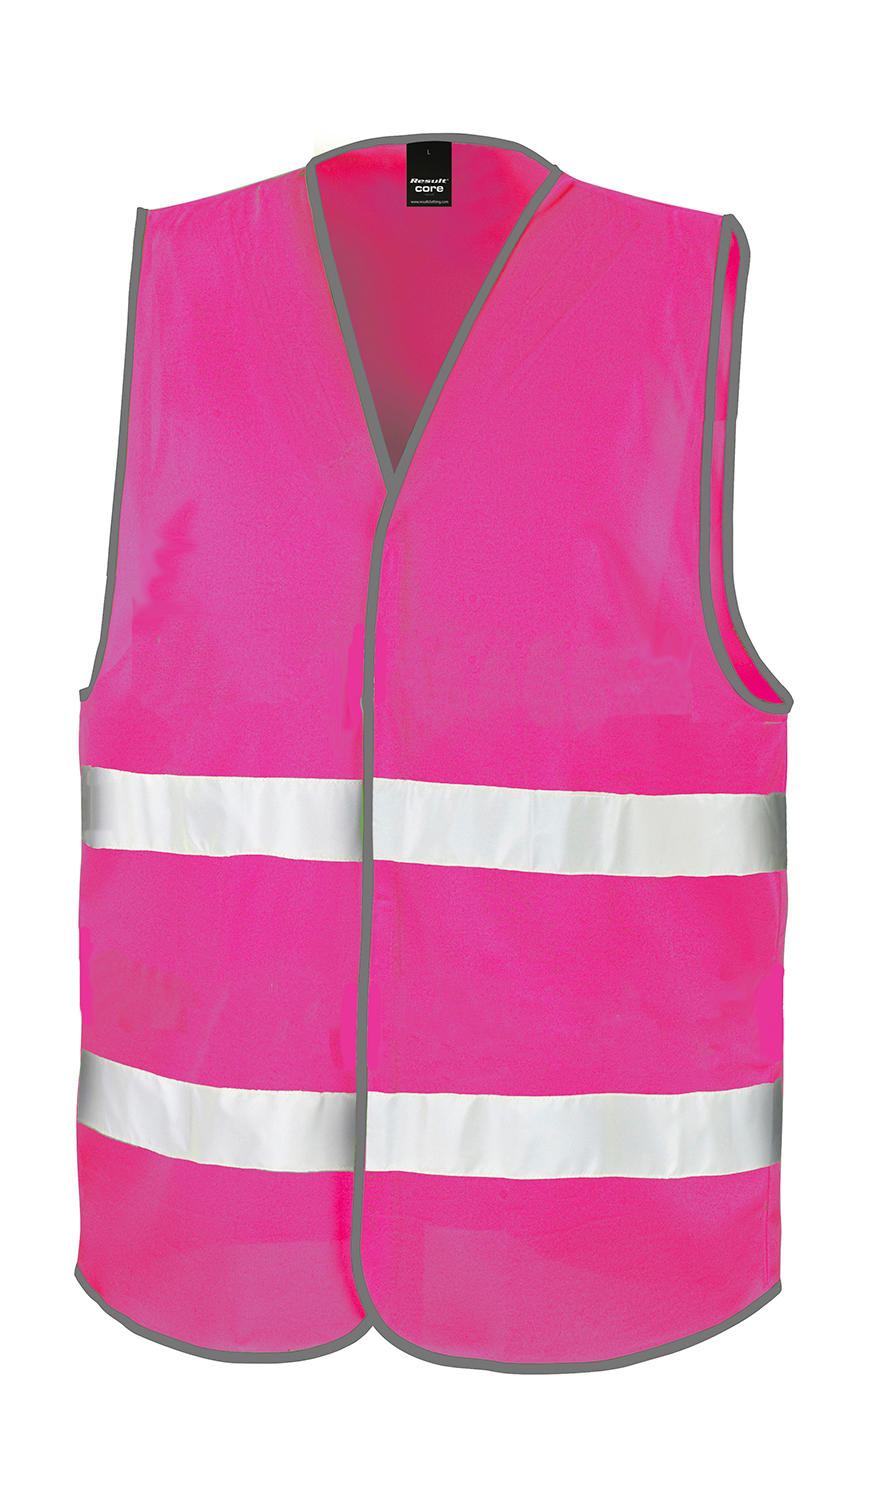  Core Enhanced Visibility Vest in Farbe Fluorescent Pink